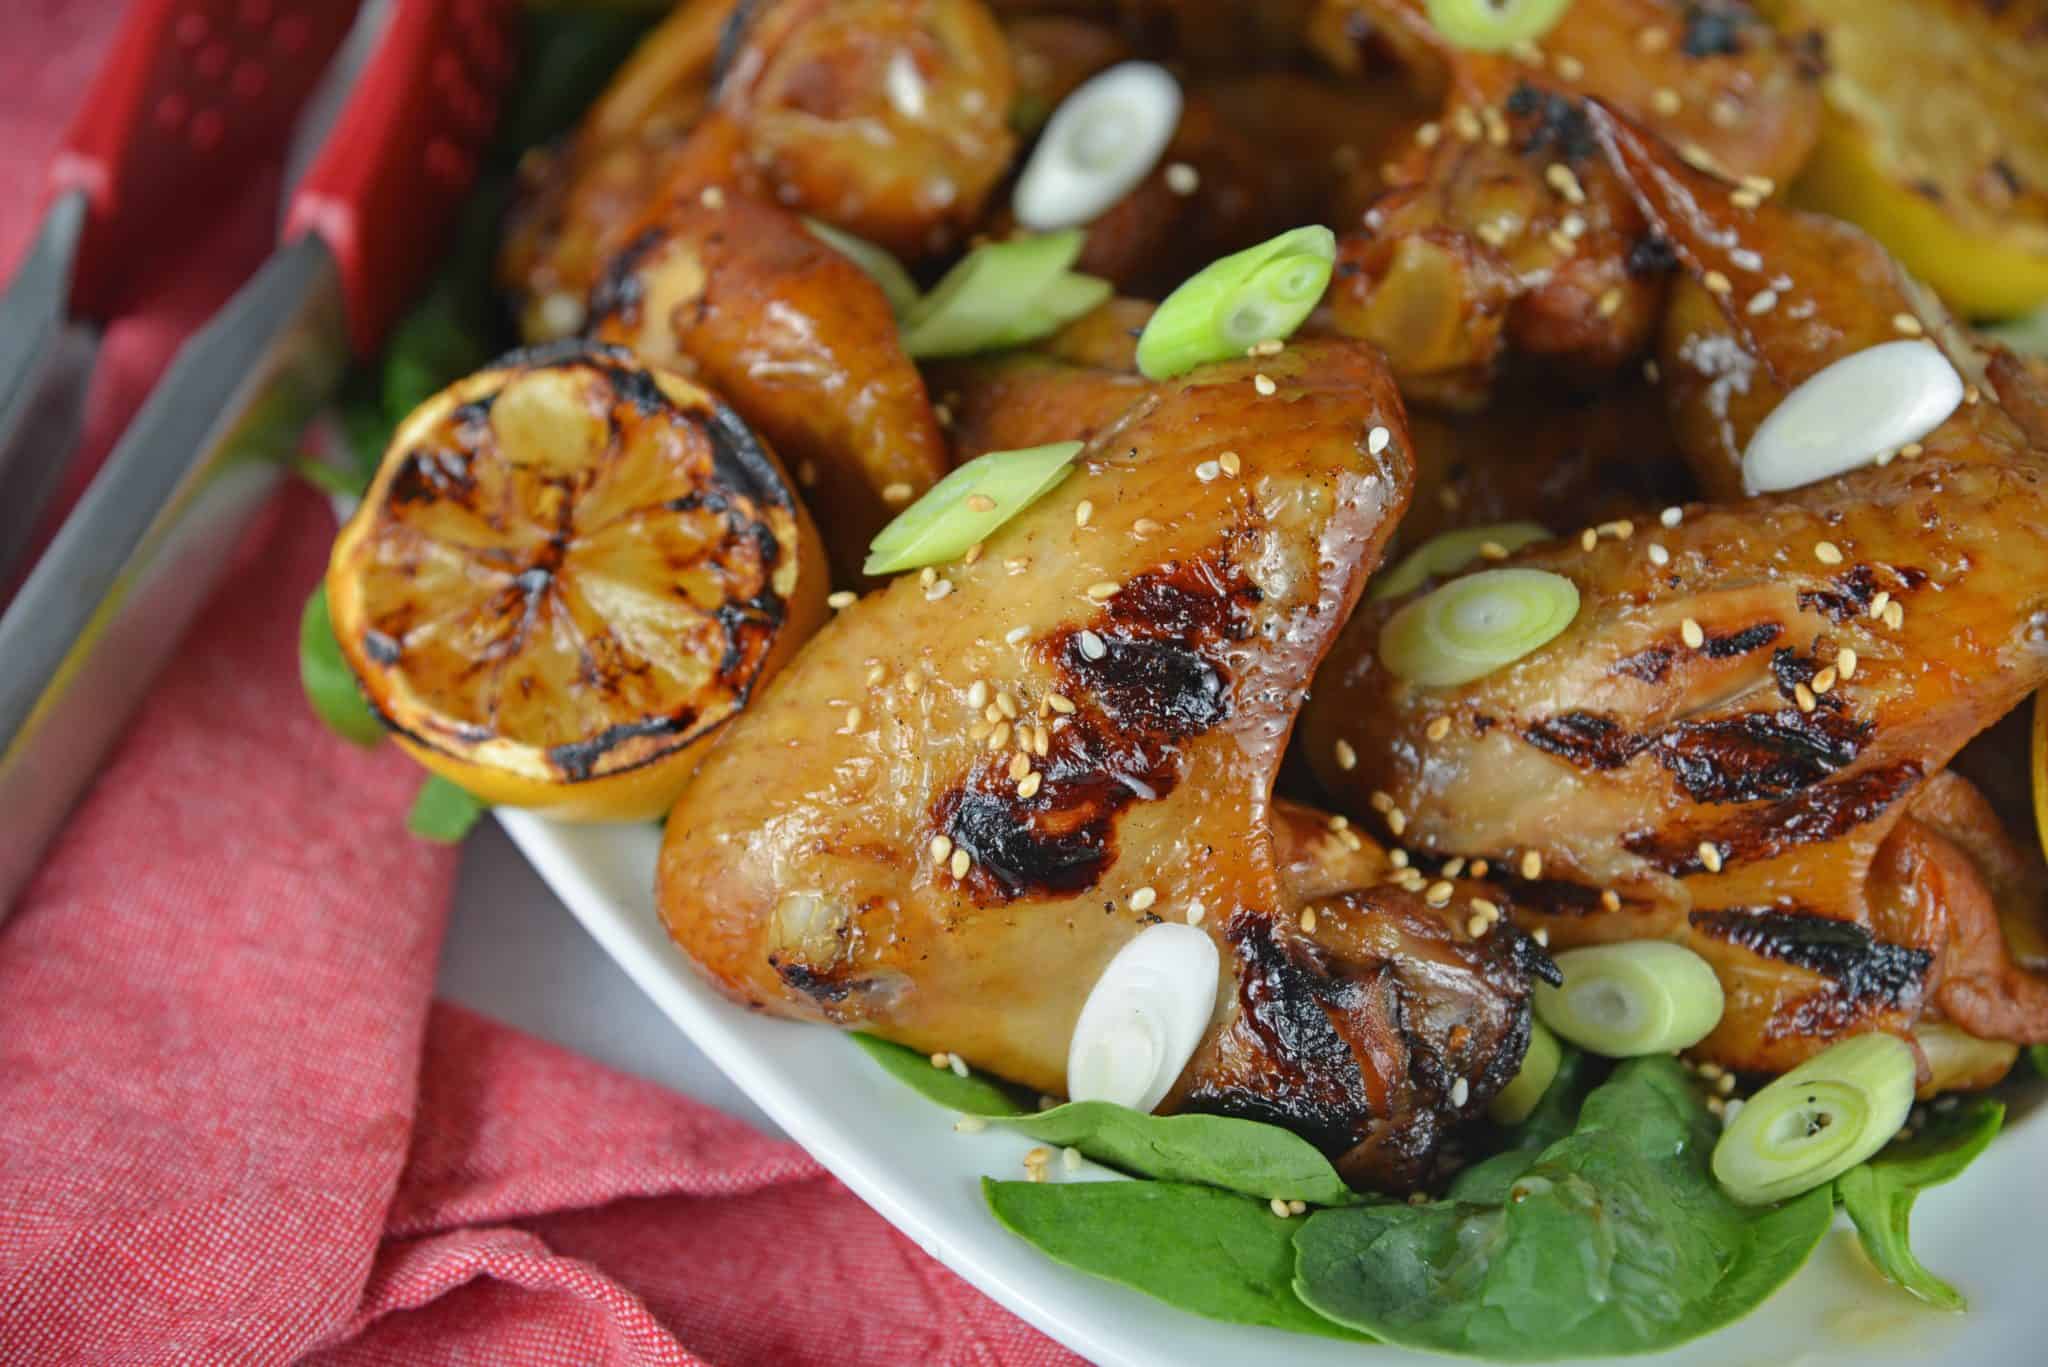 Lemon Garlic Yakitori Wings are marinated in a zesty lemon garlic marinade and grilled to perfection. Serve your grilled wings with classic BBQ side dishes. 